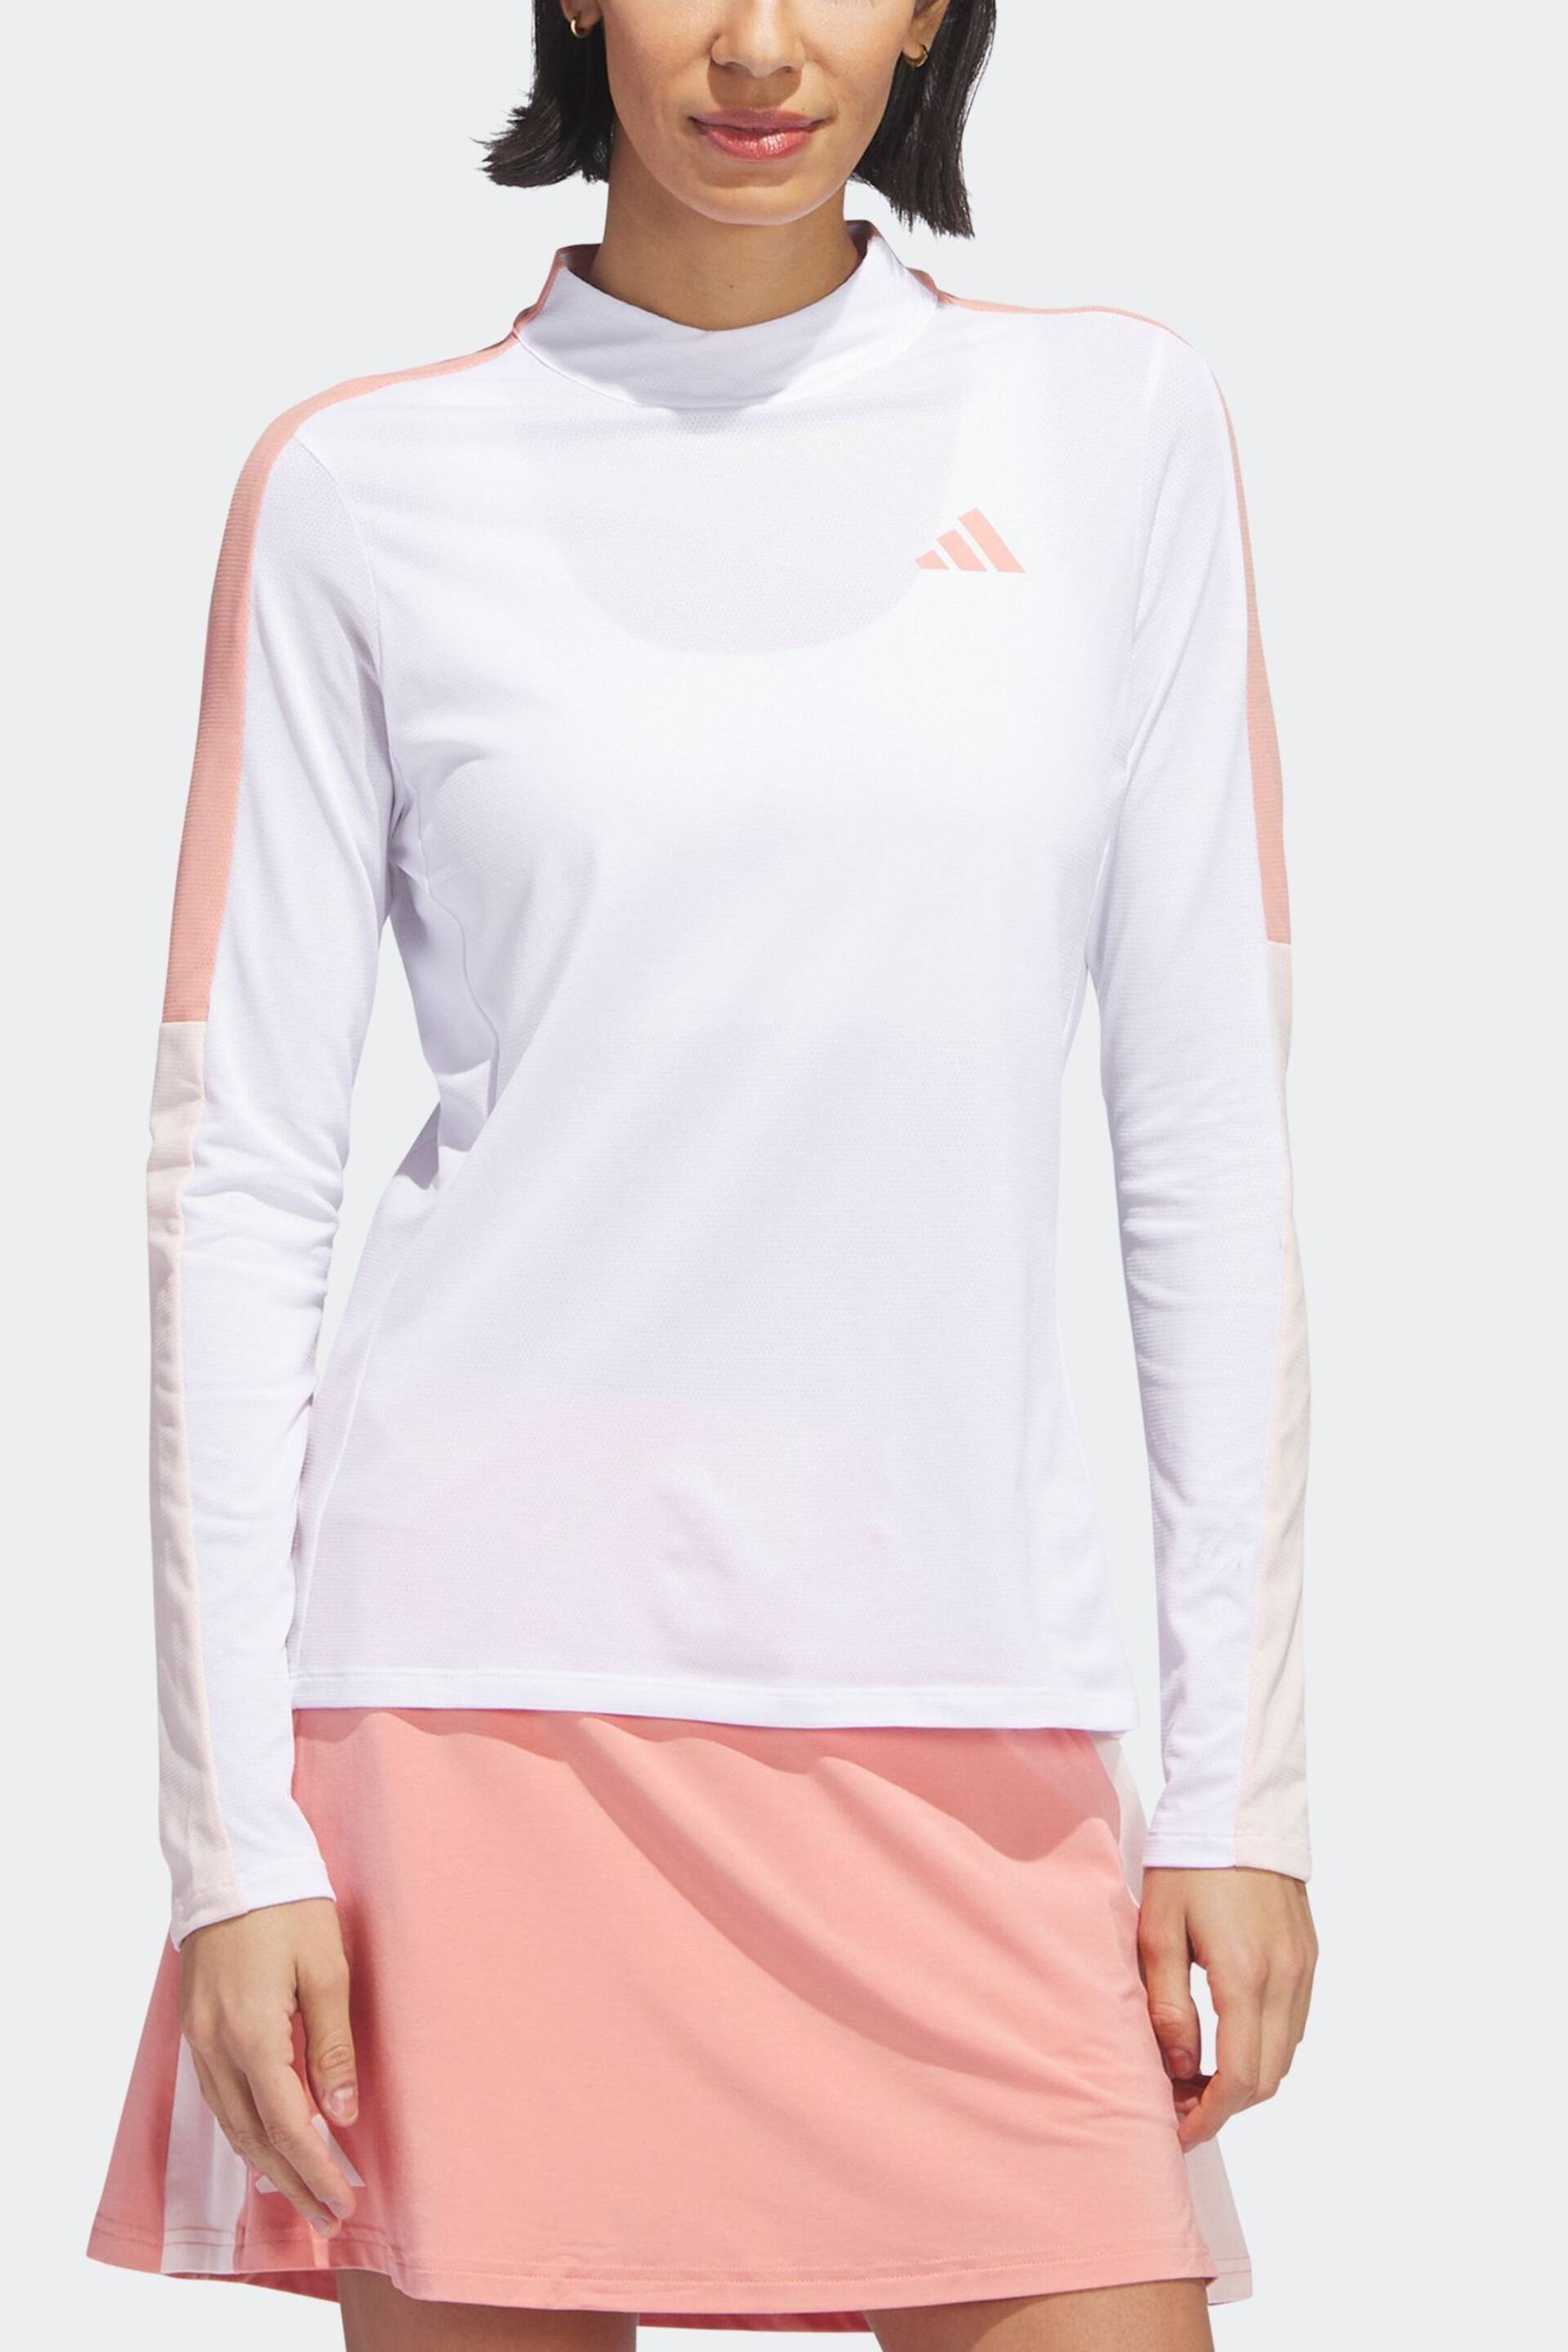 adidas Golf White/Coral Made With Nature Mock Neck Long-Sleeve Top - Image 3 of 7